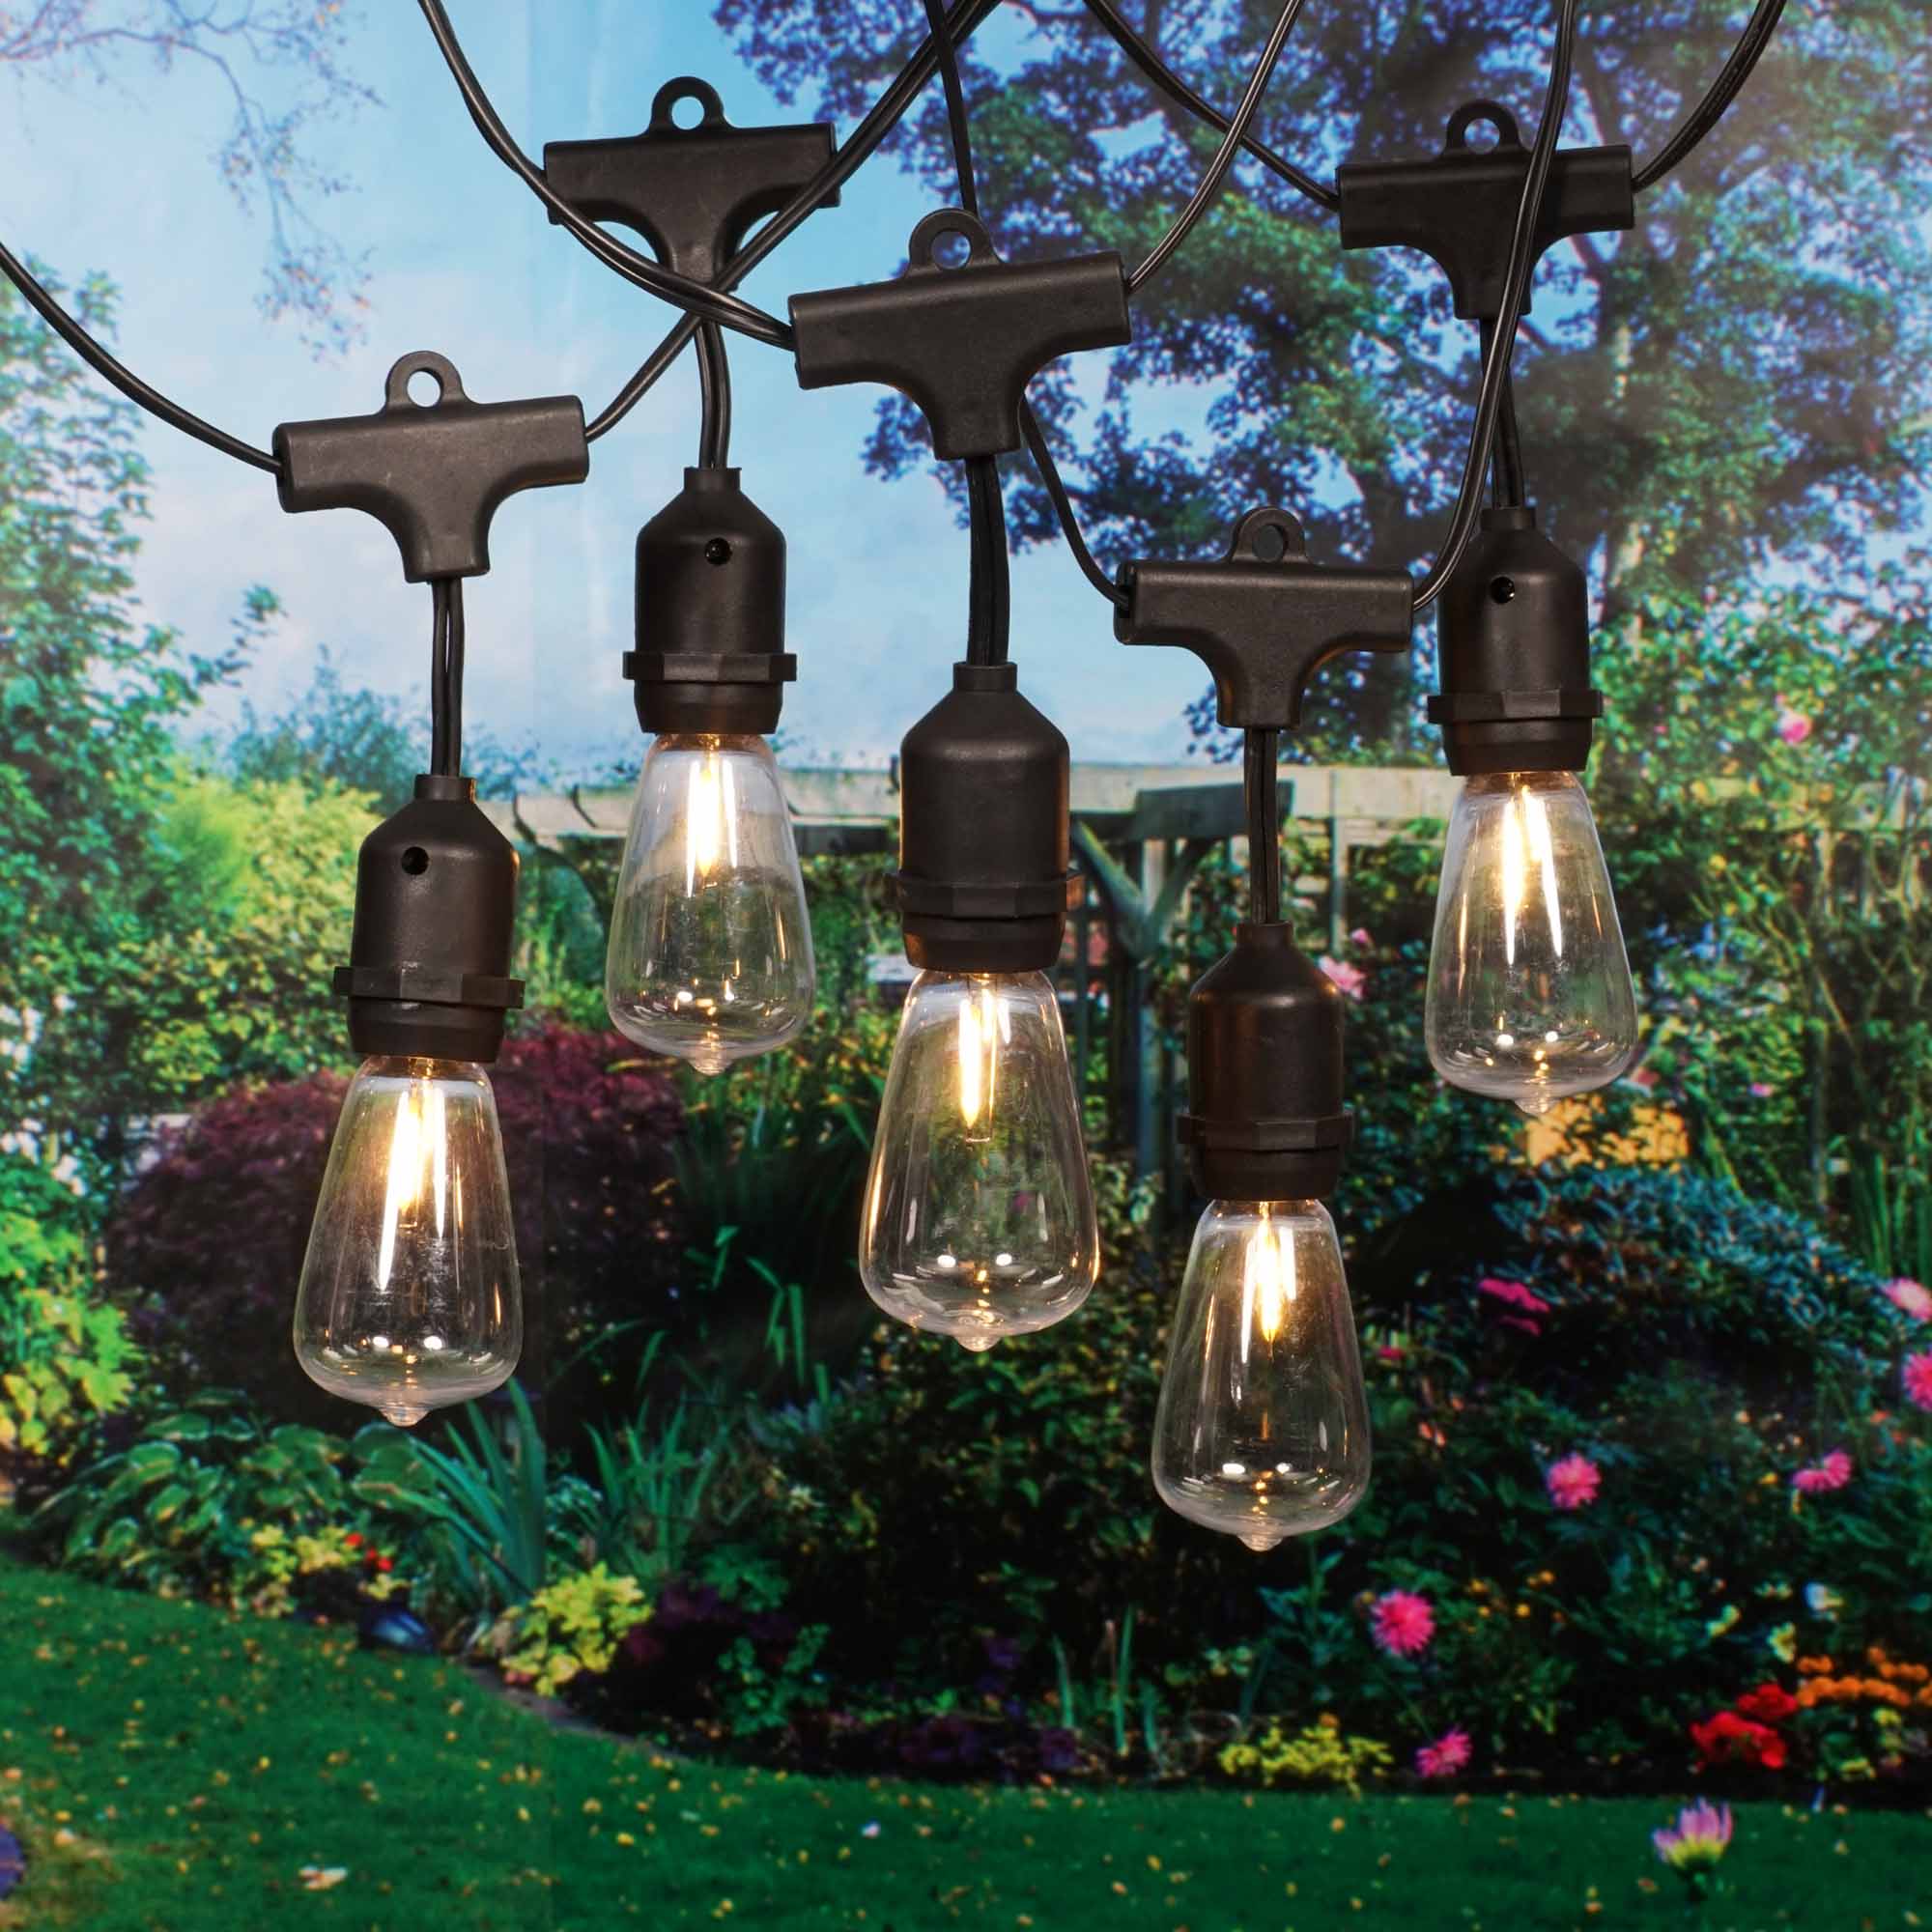 Better Homes & Gardens 15-Count Shatterproof Edison Bulb Outdoor String Lights with Black Wire - image 3 of 8